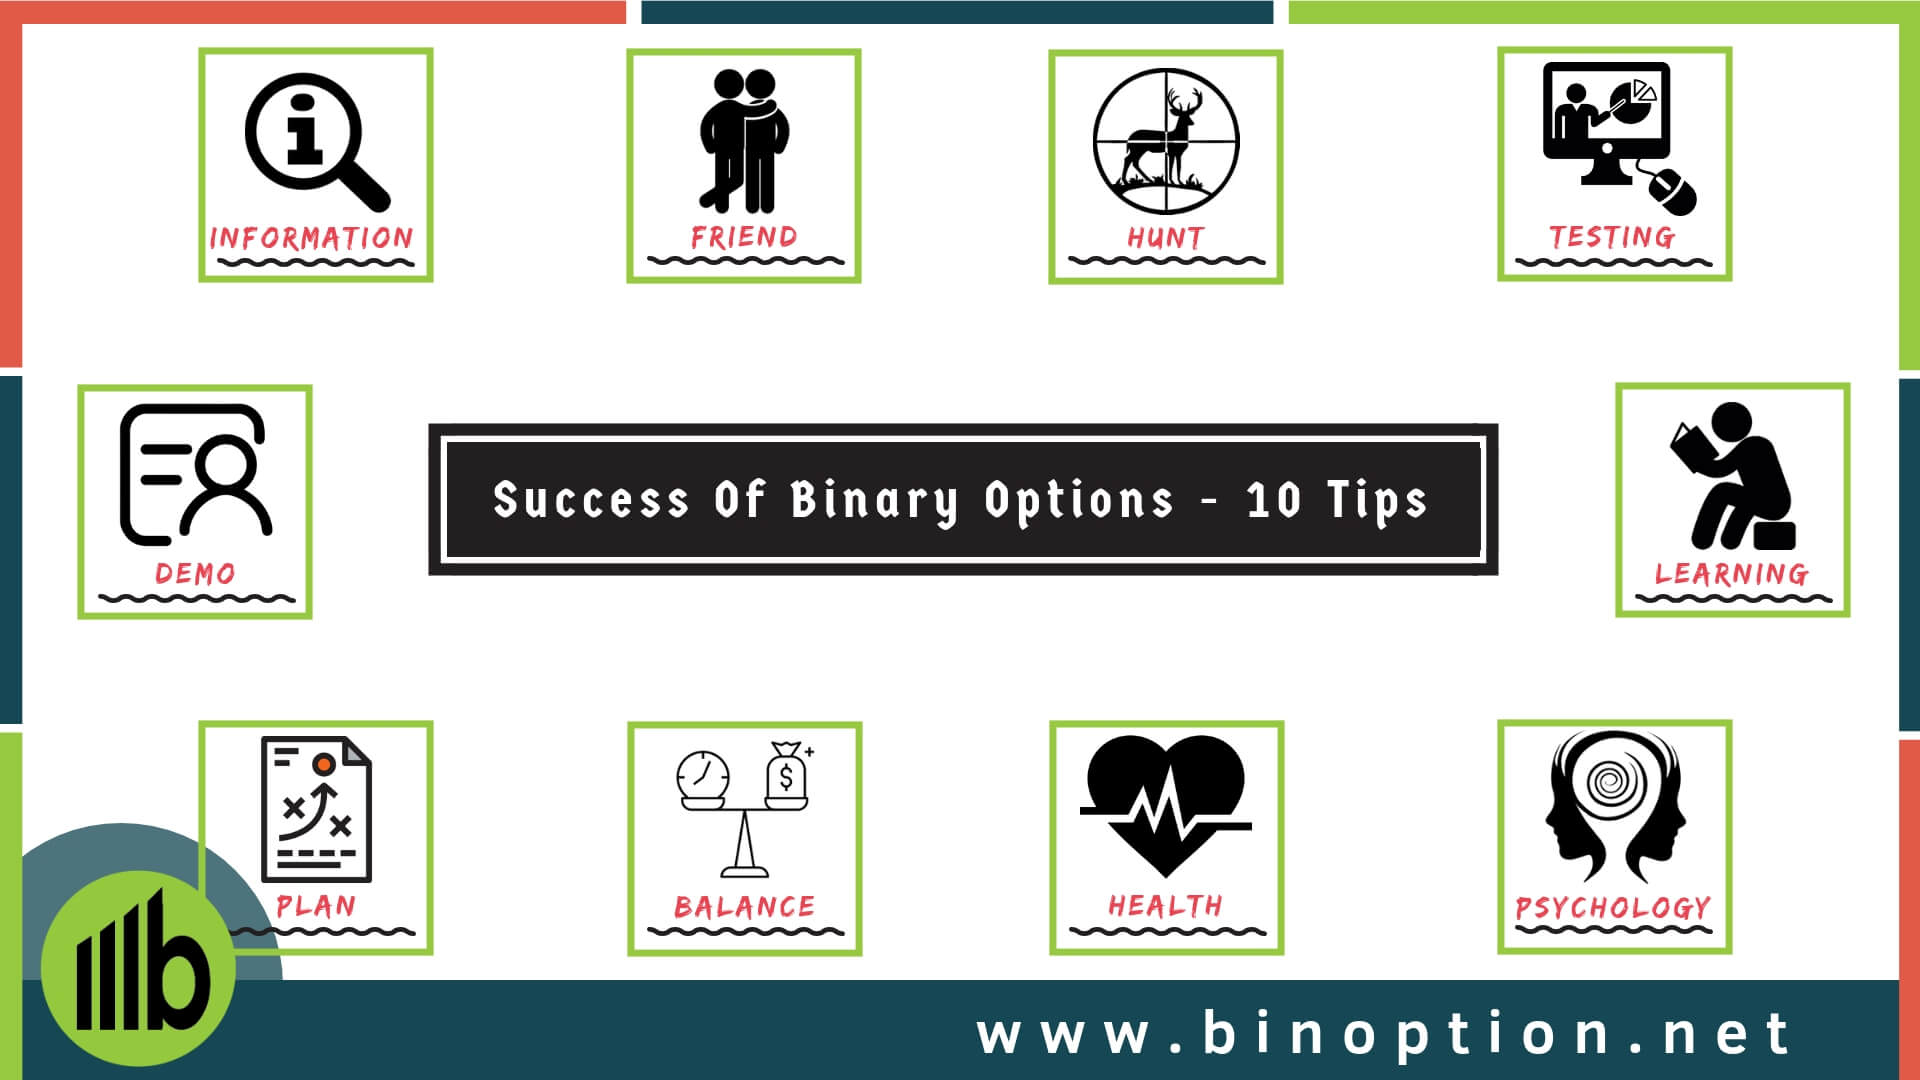 Become a successful binary options trader